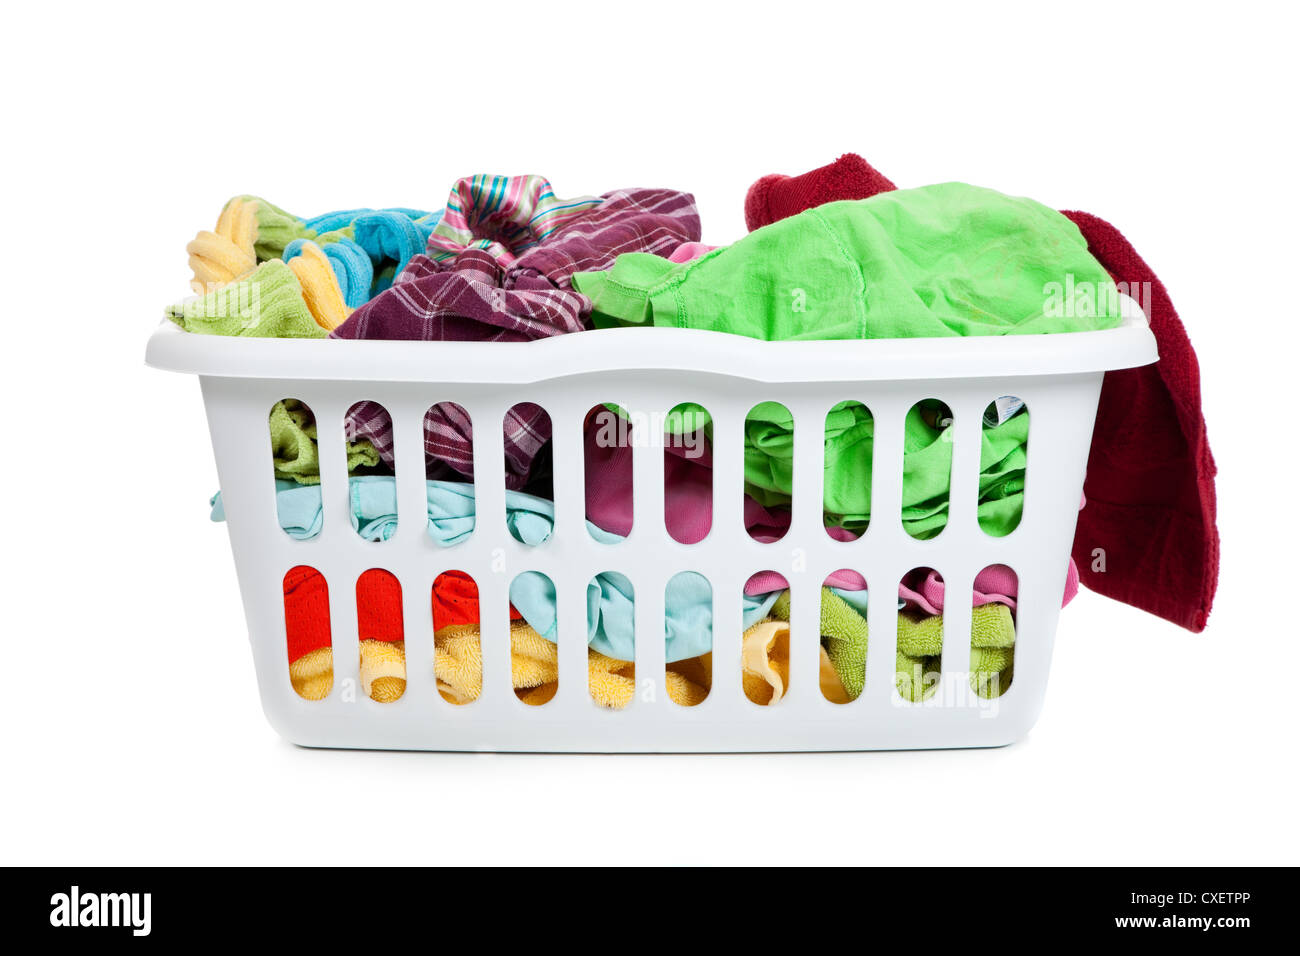 White plastic laundry basket full of dirty clothes Stock Photo